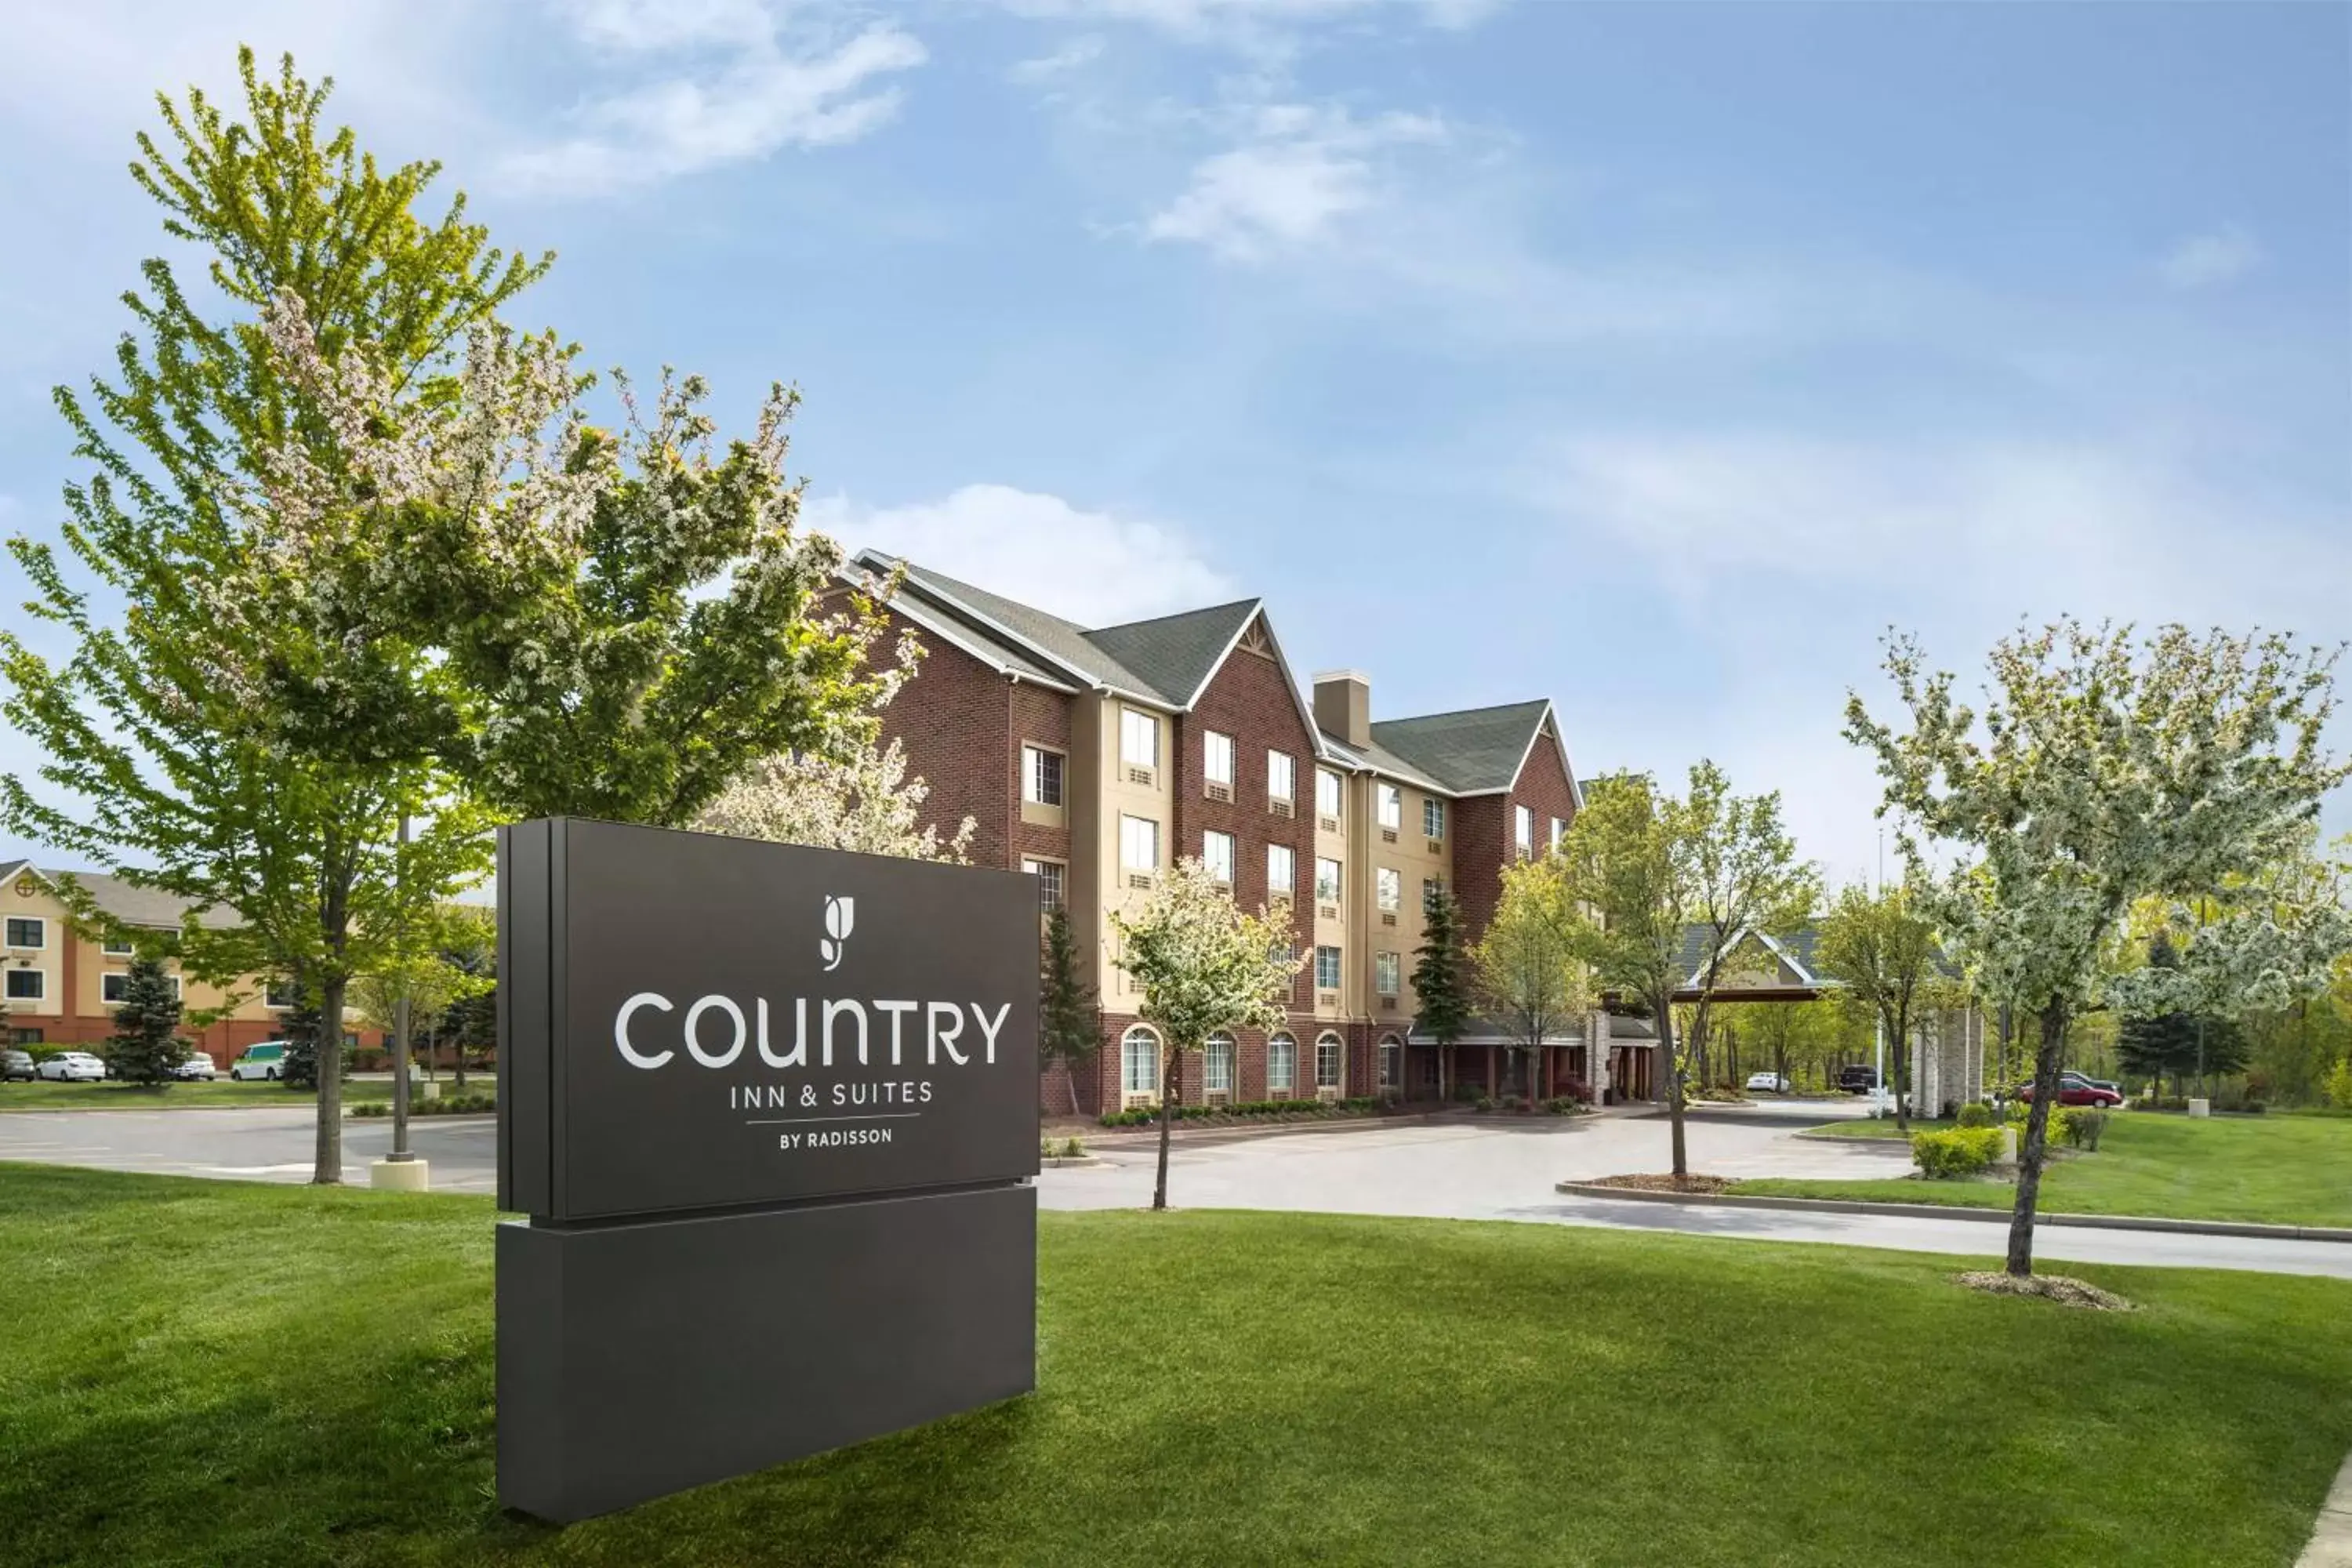 Property building in Country Inn & Suites by Radisson, Novi, MI